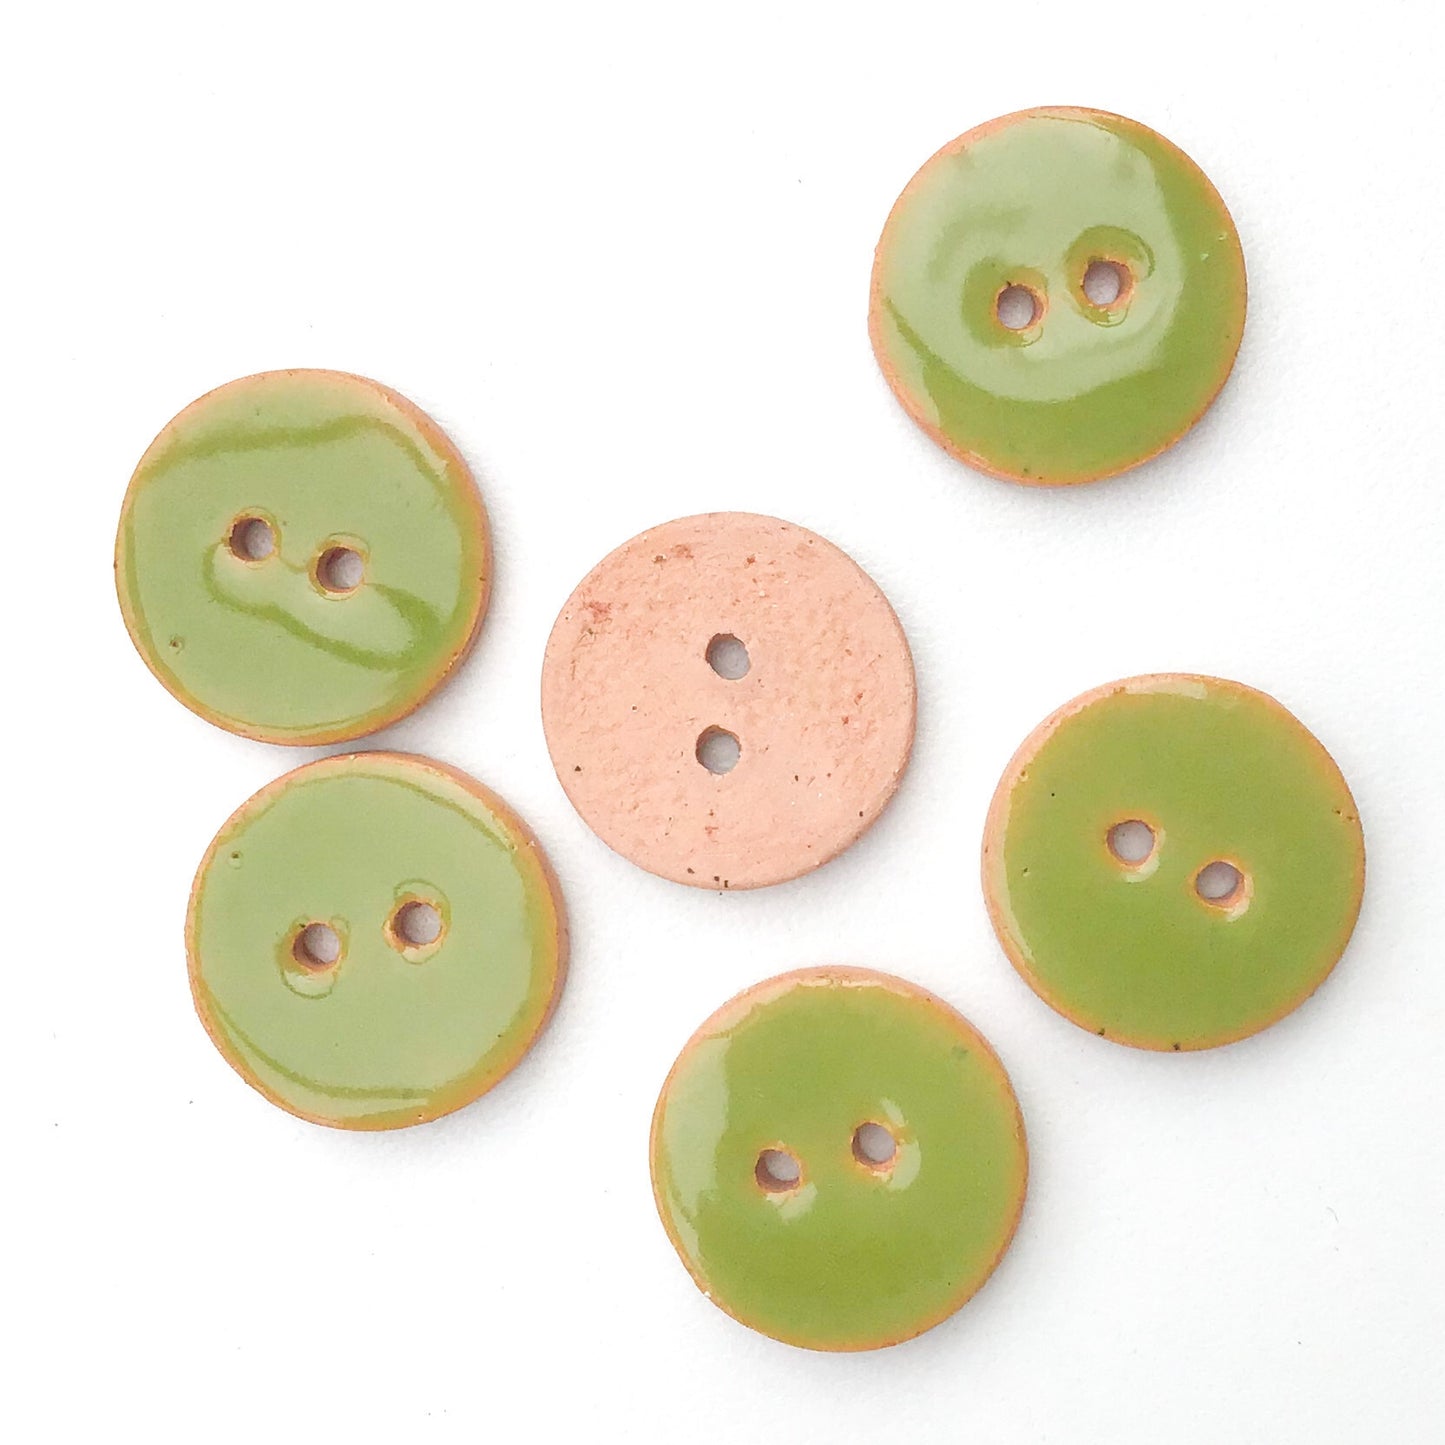 Olive Green Ceramic Buttons - Green Clay Buttons - 3/4" - 6 Pack (ws-136)